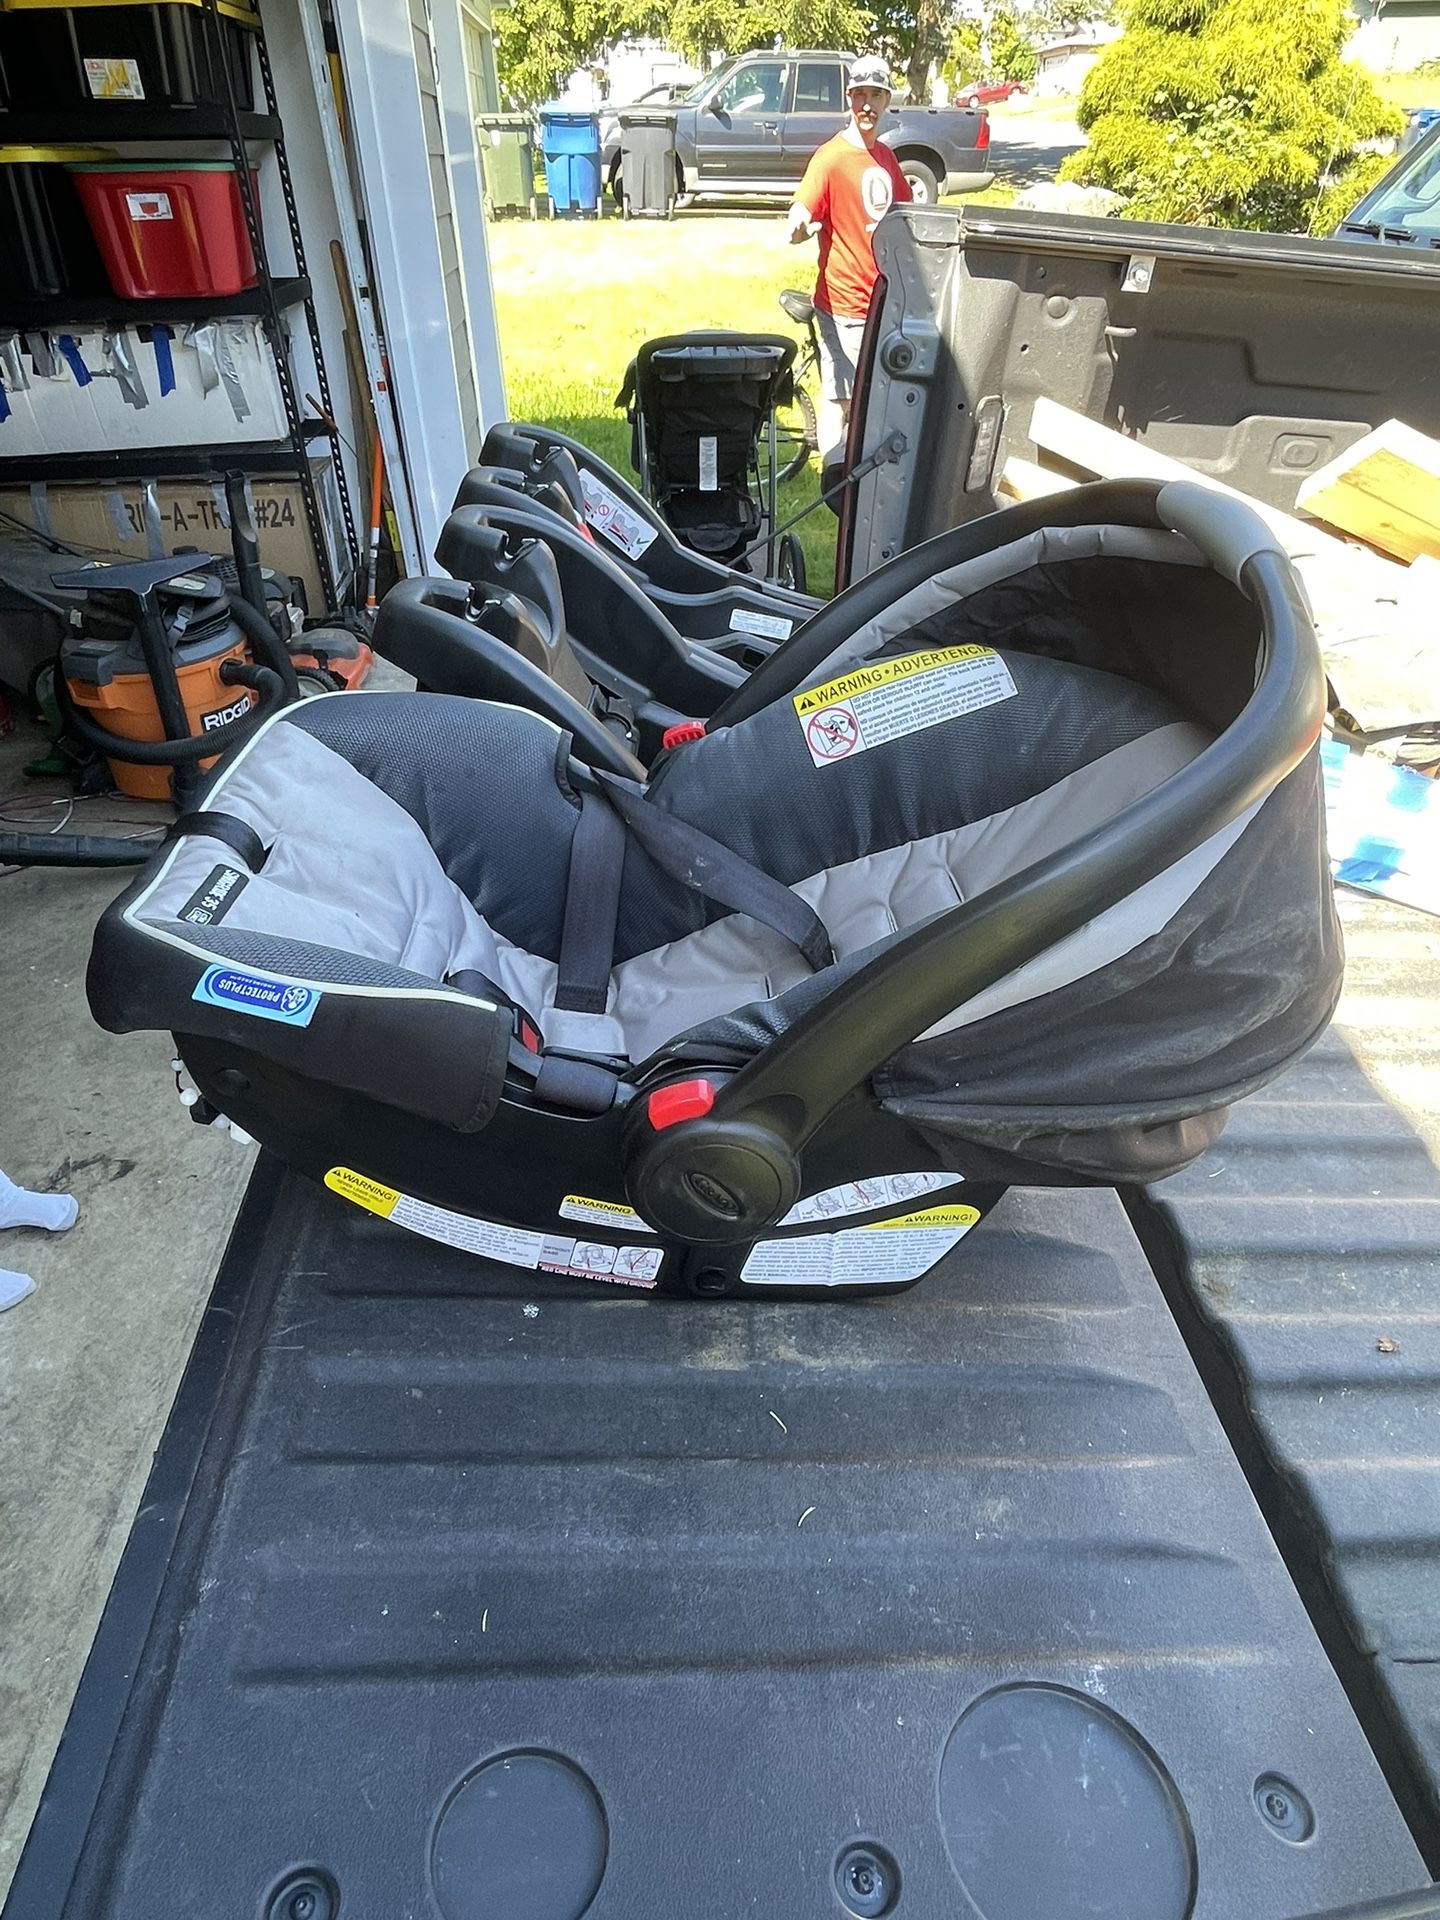 Graco Carseat and 3 Bases